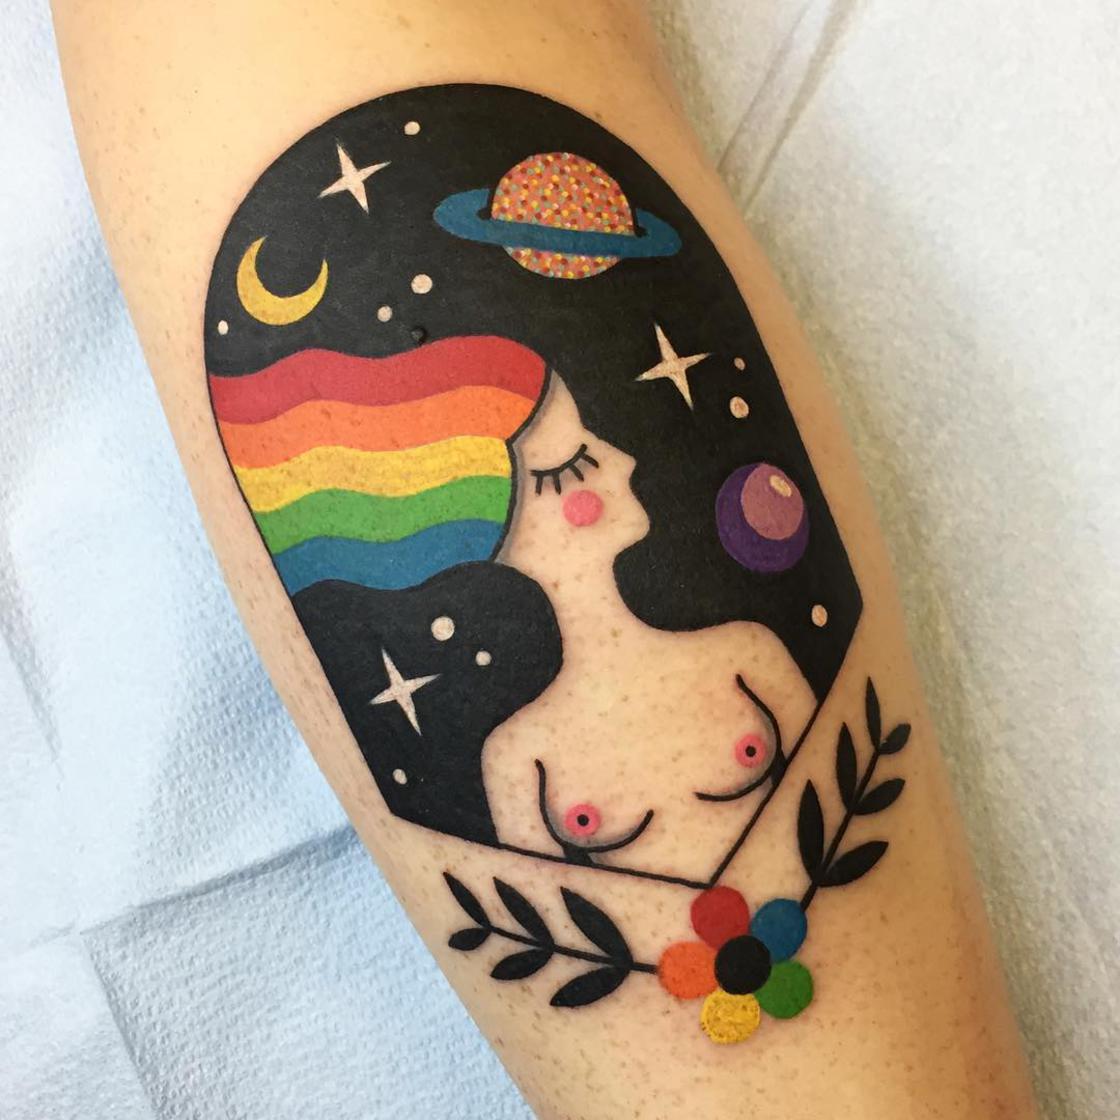 Multicolored vintage tattoos by Winston The Whale